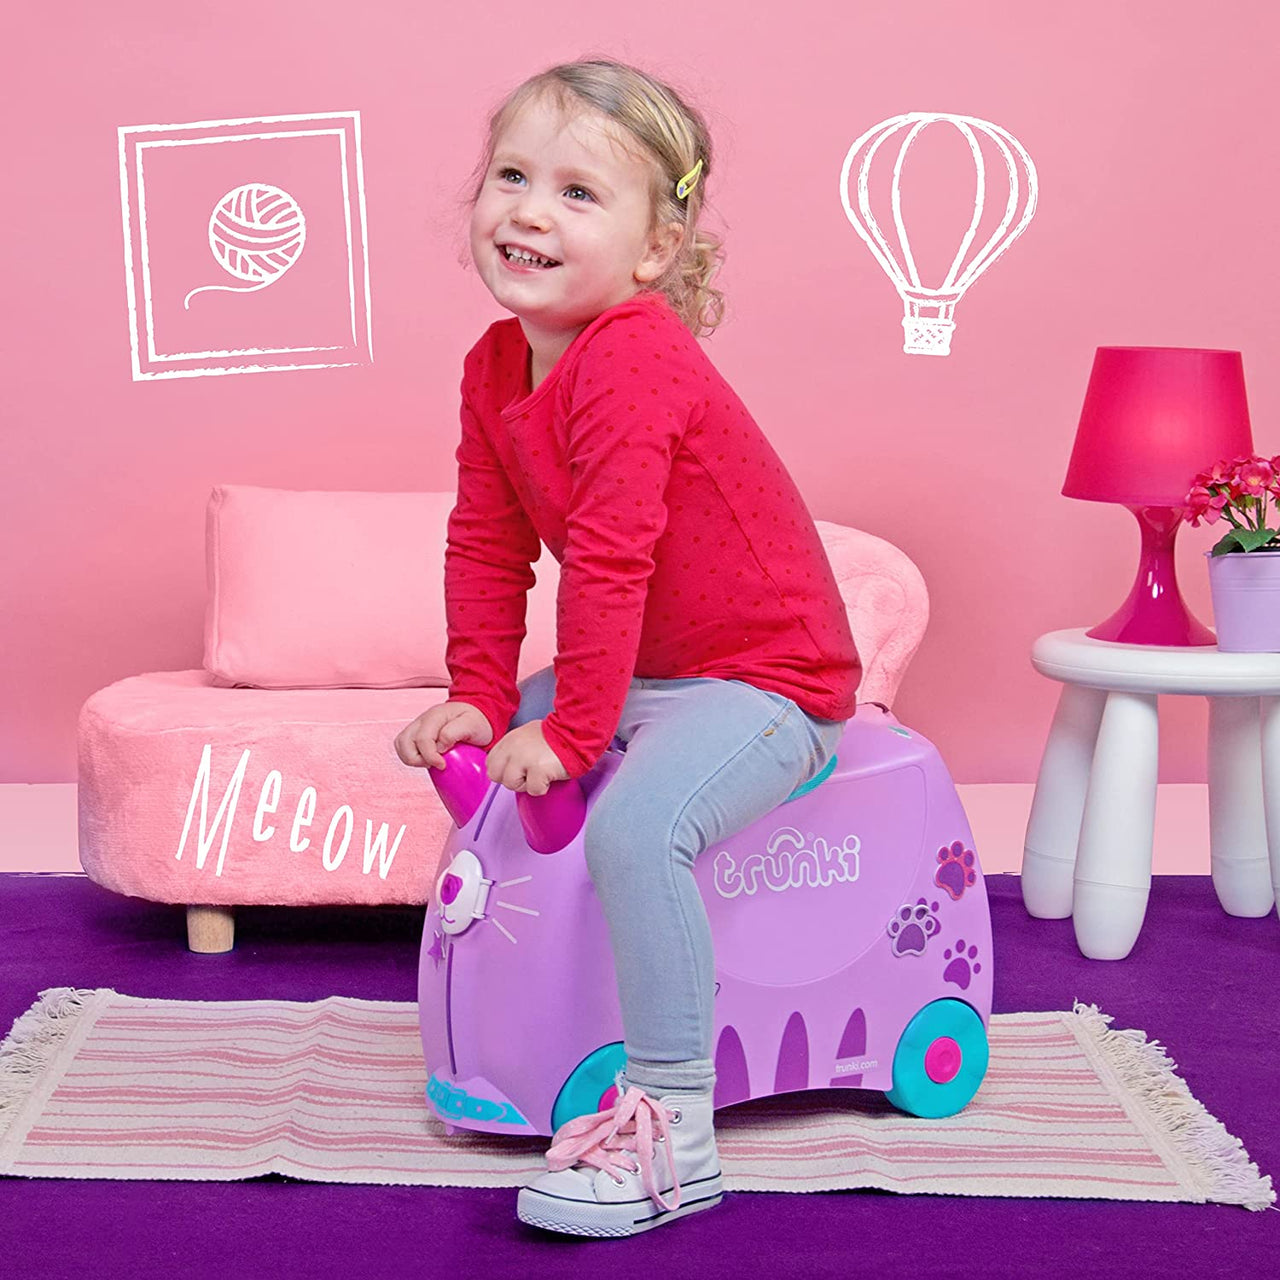 Ride-on kids suitcase - Cassie Candy Cat